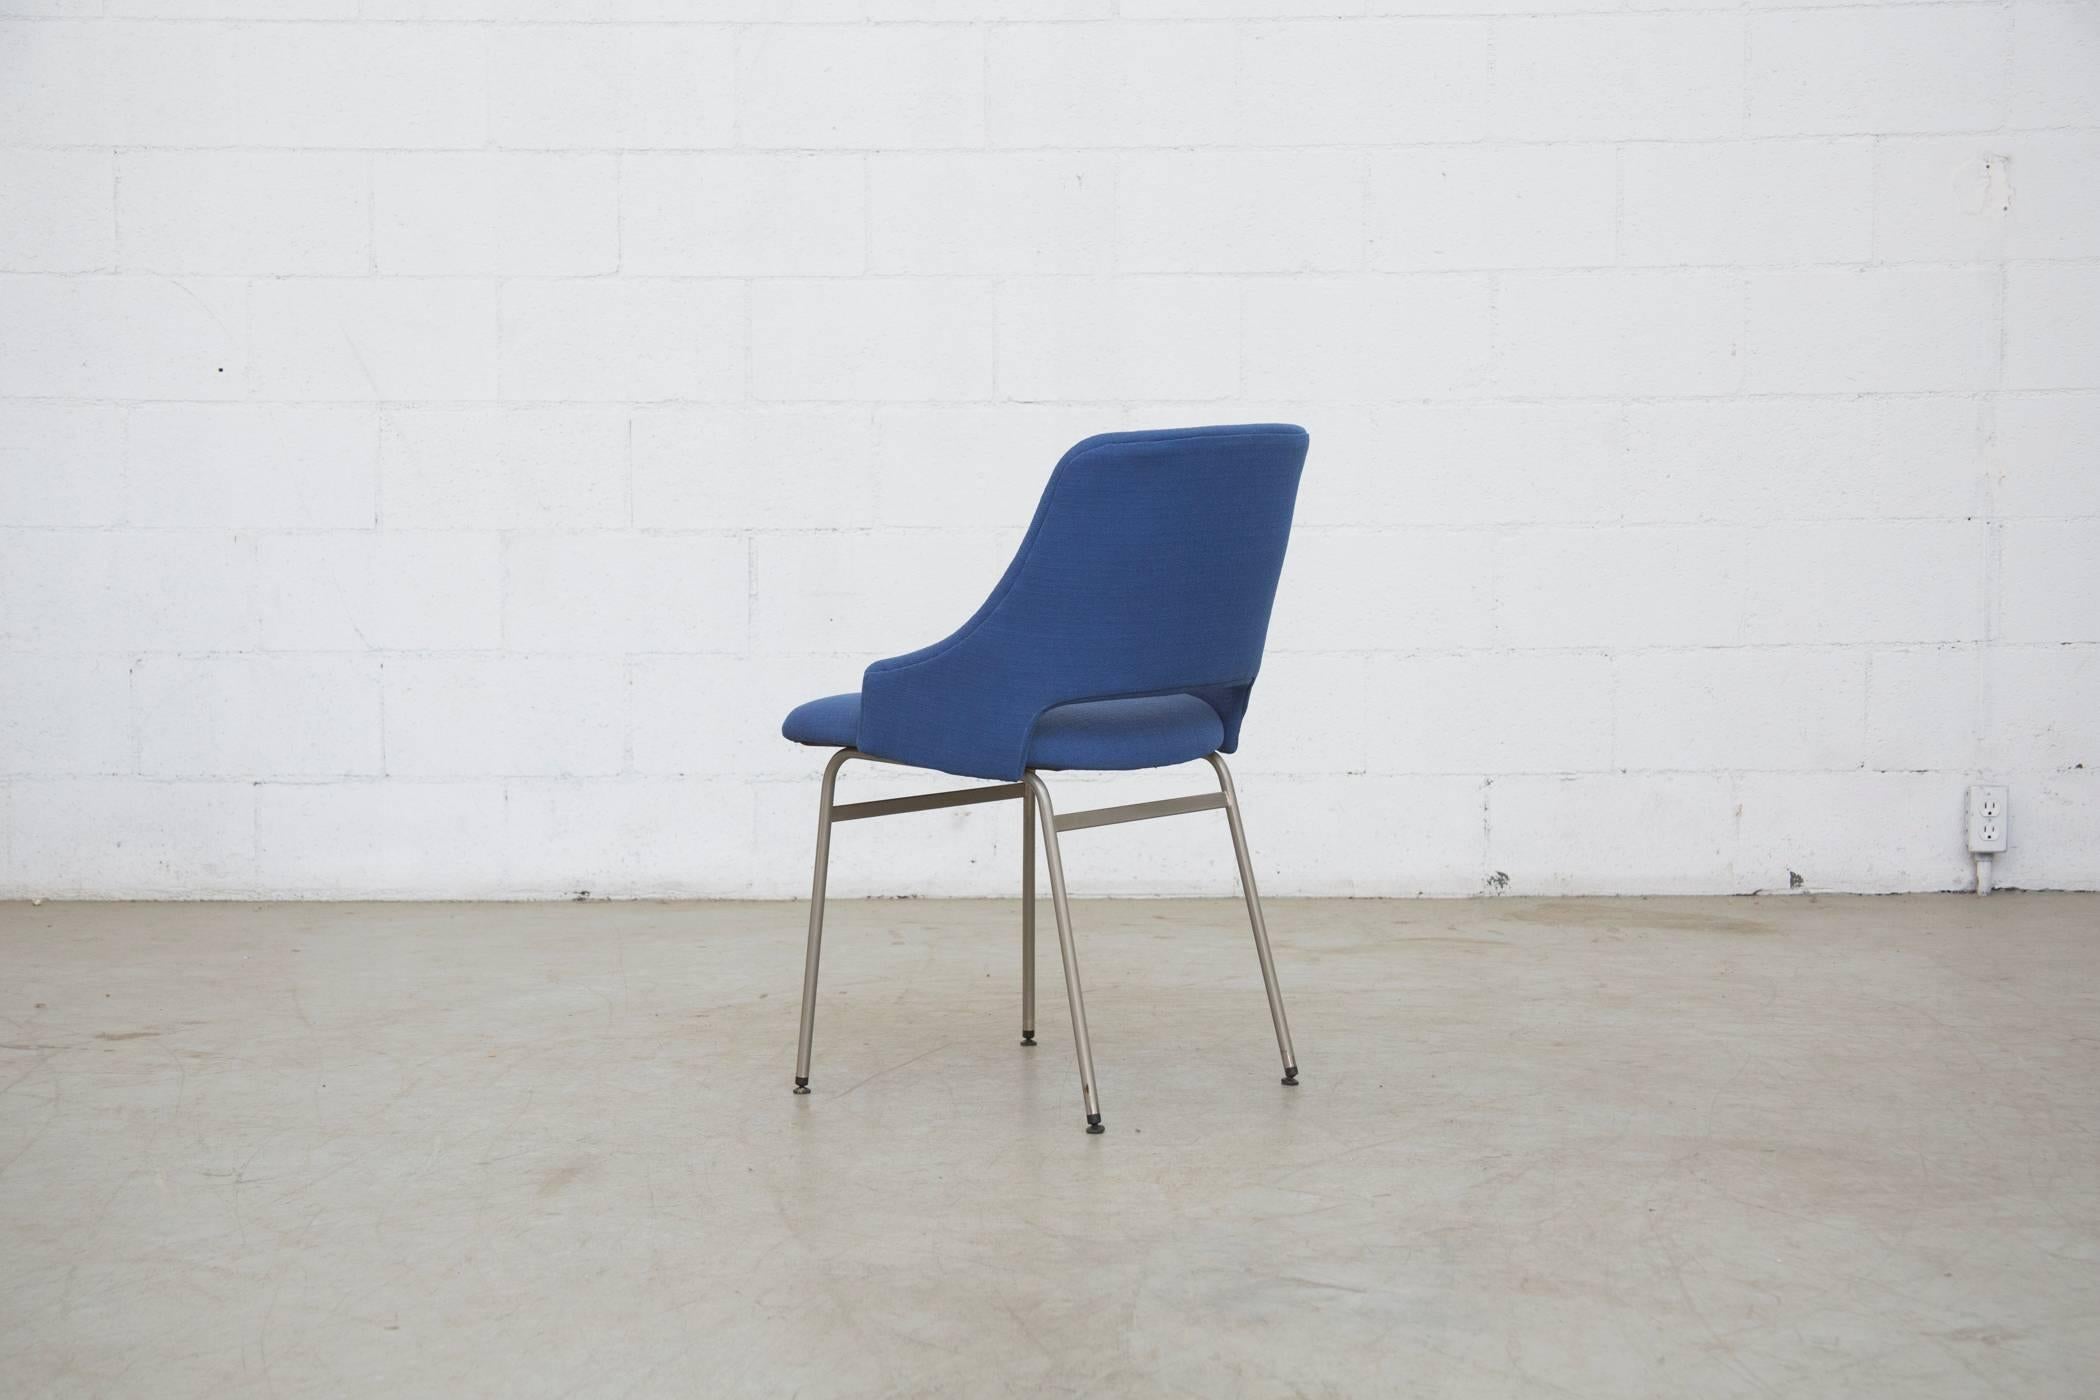 Dutch Set of Four Pastoe FM 32 Chairs in Royal Blue